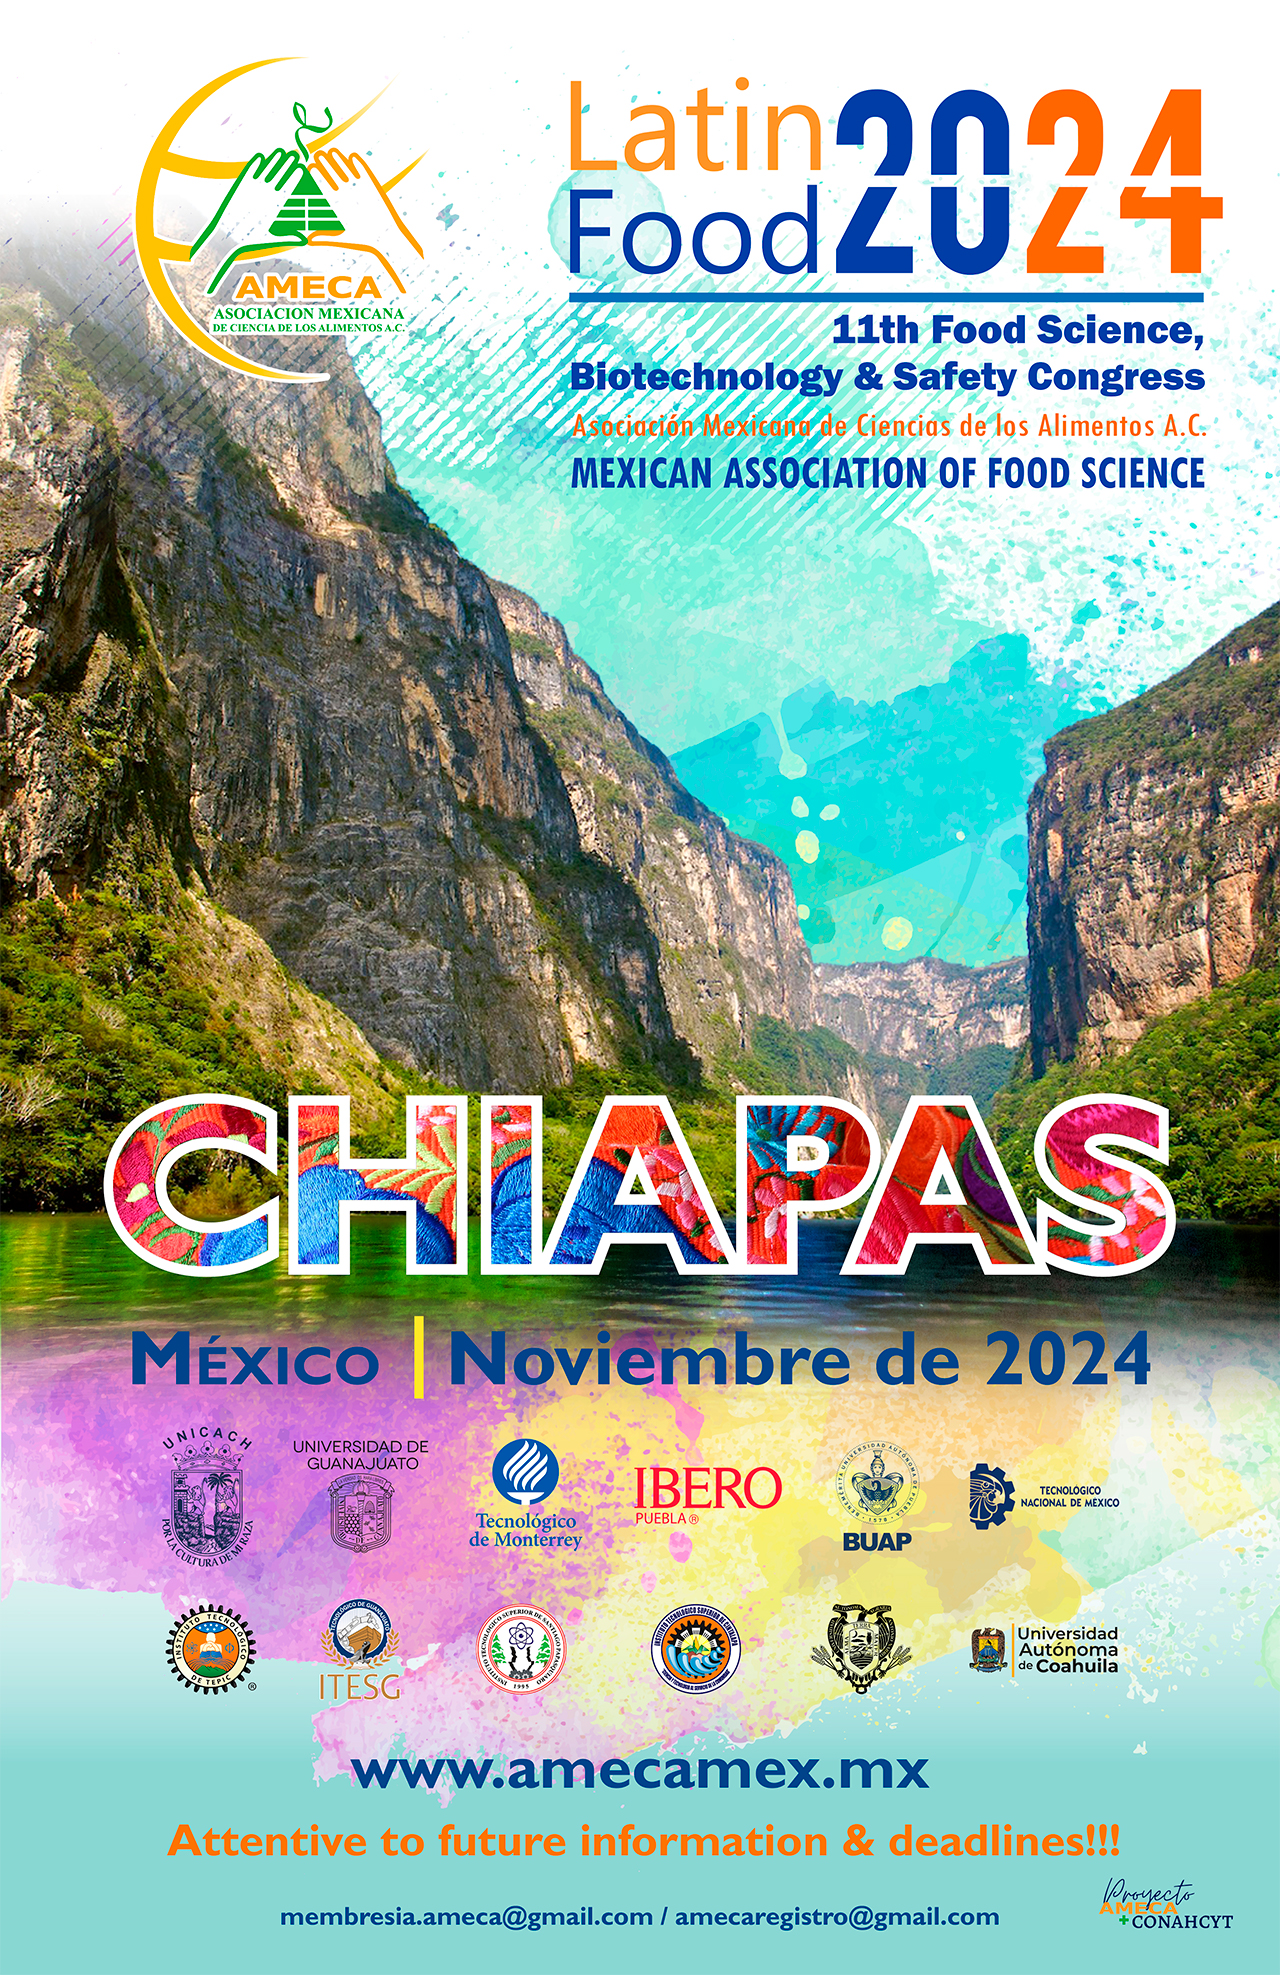 Latin Food 2024, 11th Food Science, Biotechnology & Safety Congress Chiapas - AMECA, AC